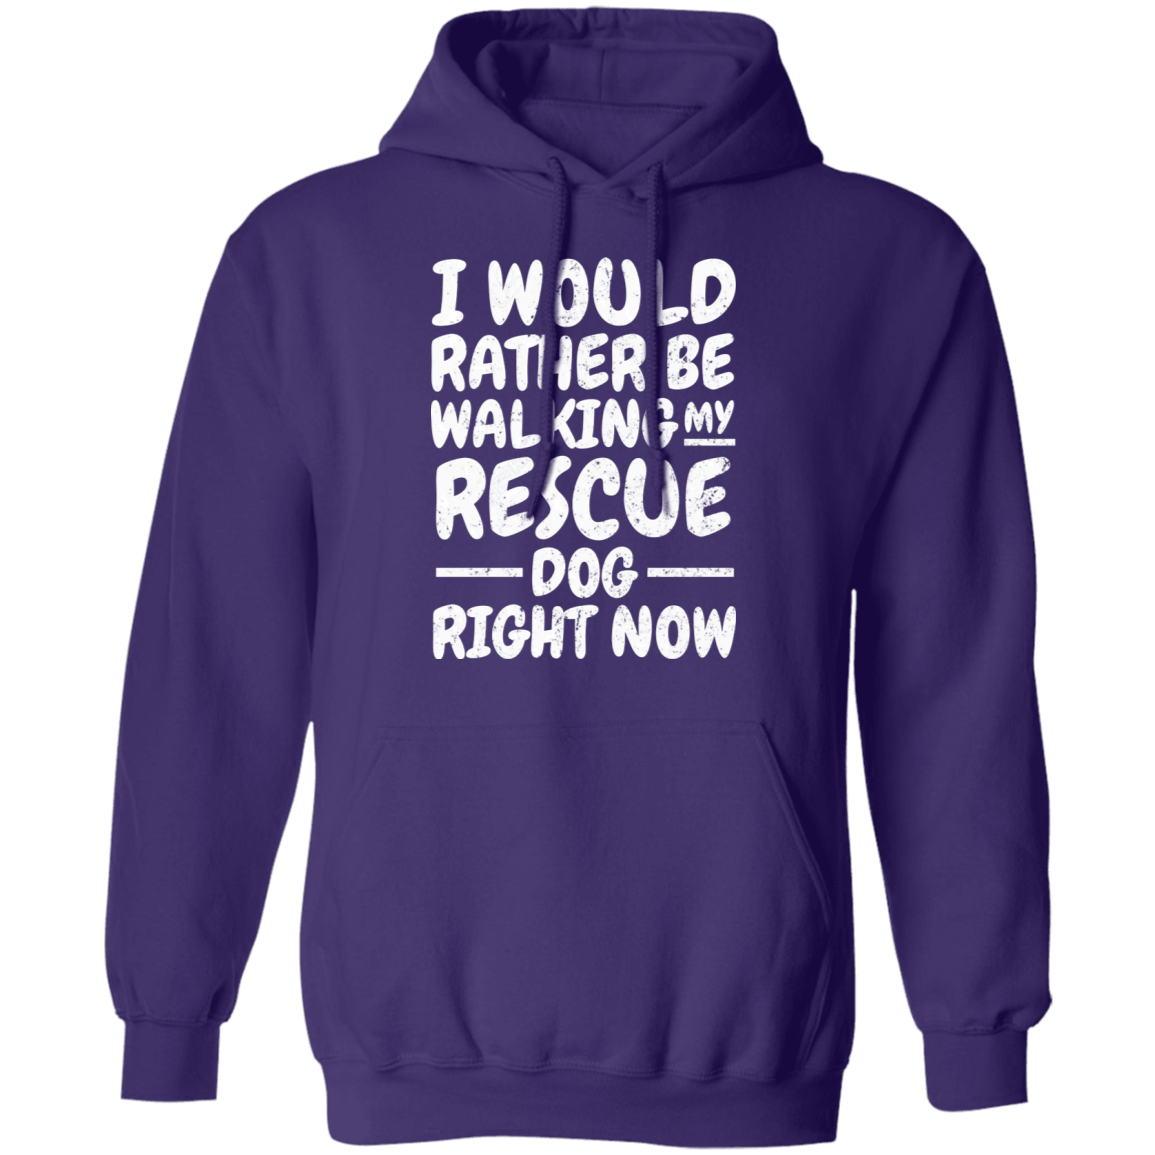 I Would Rather - Hoodie.